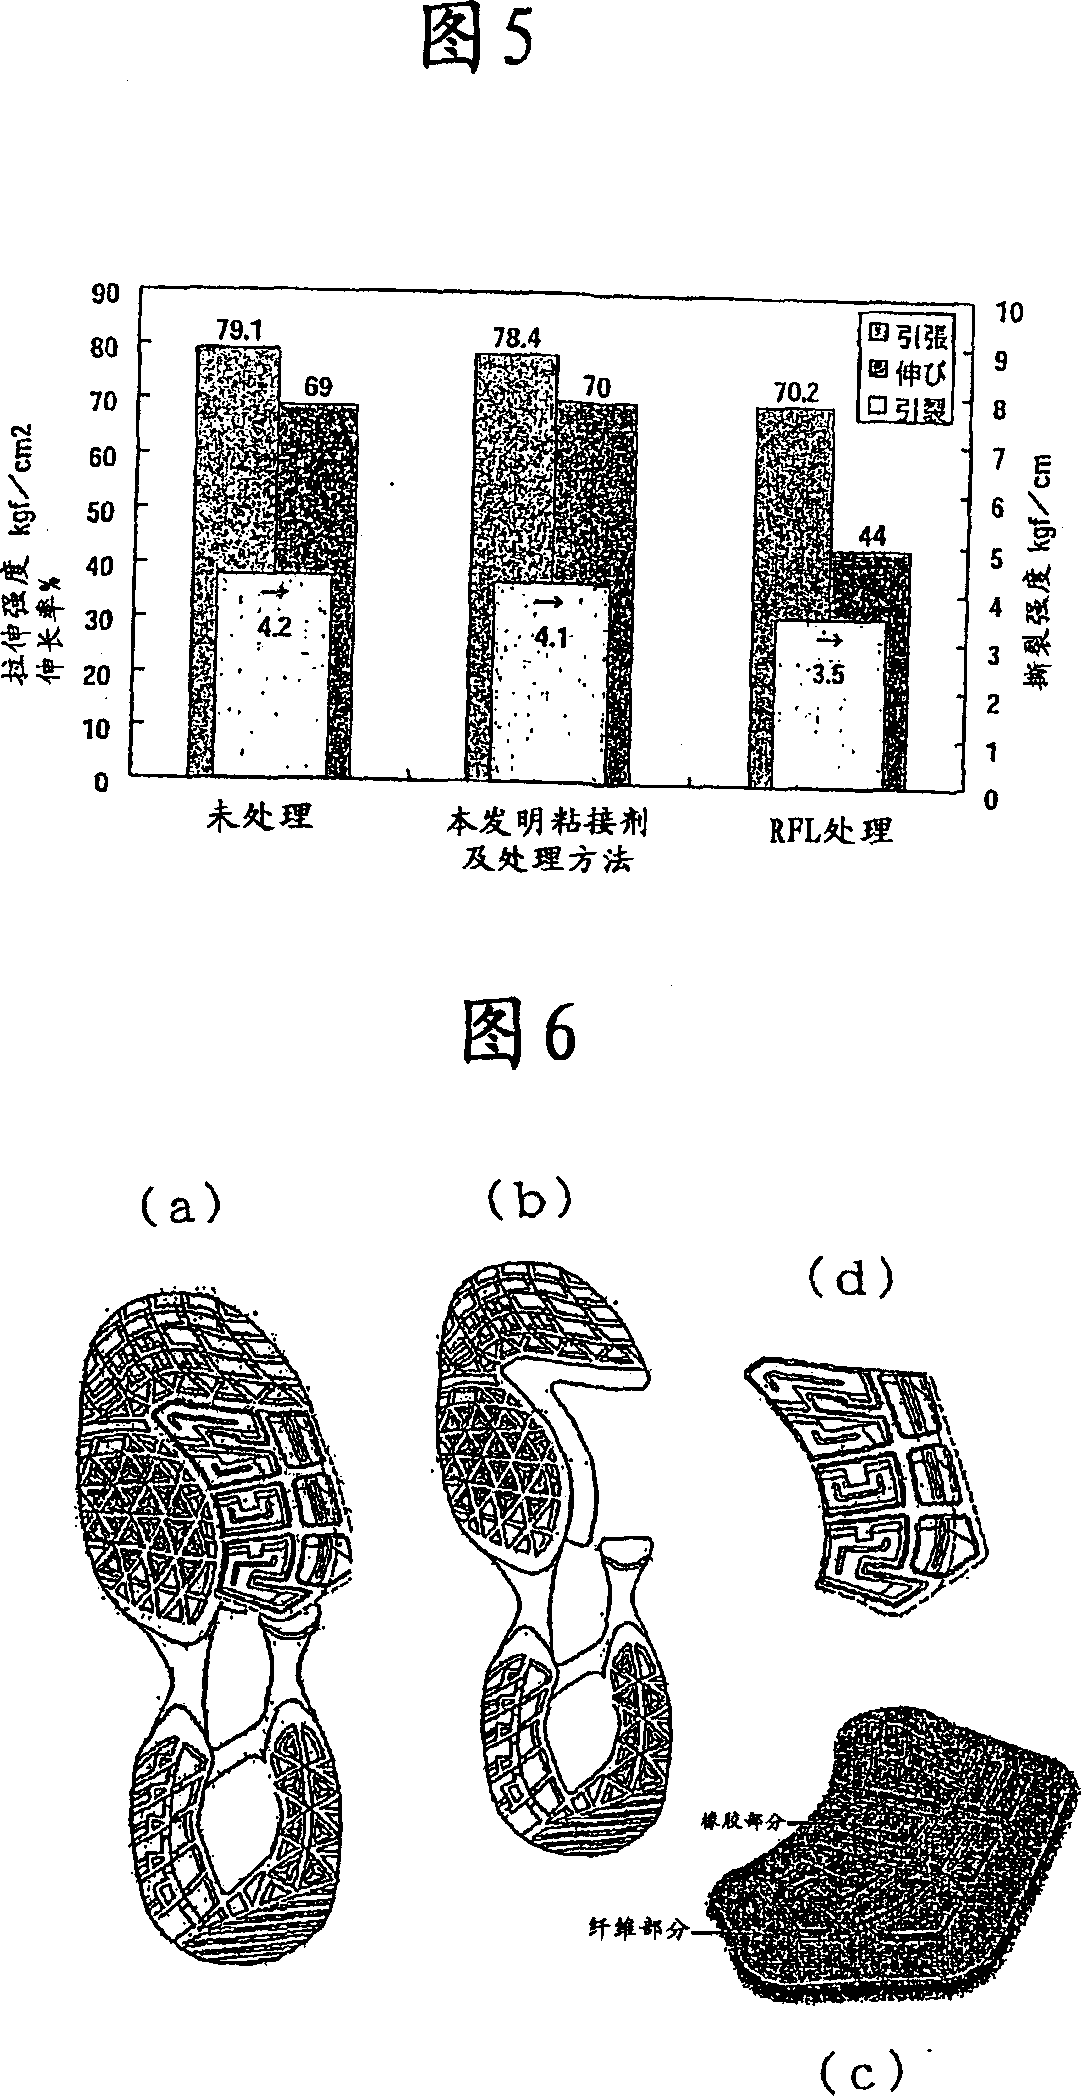 Fabric-vulcanized rubber composite and process for production thereof